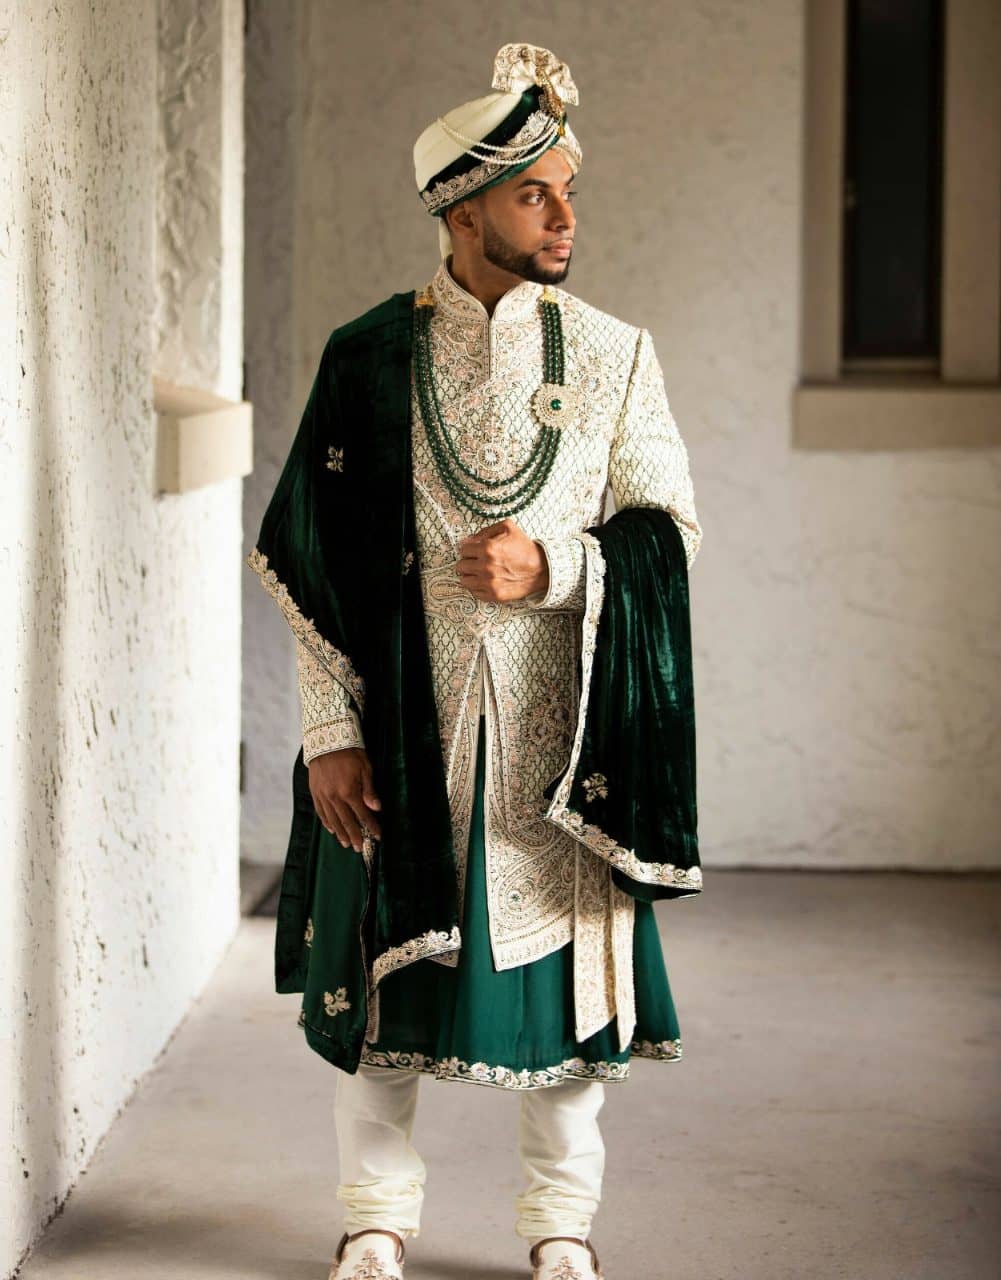 11 Best Maharashtrian Groom Wear Ideas For Your Man | Couples costumes  creative, Best couples costumes, Couples costumes